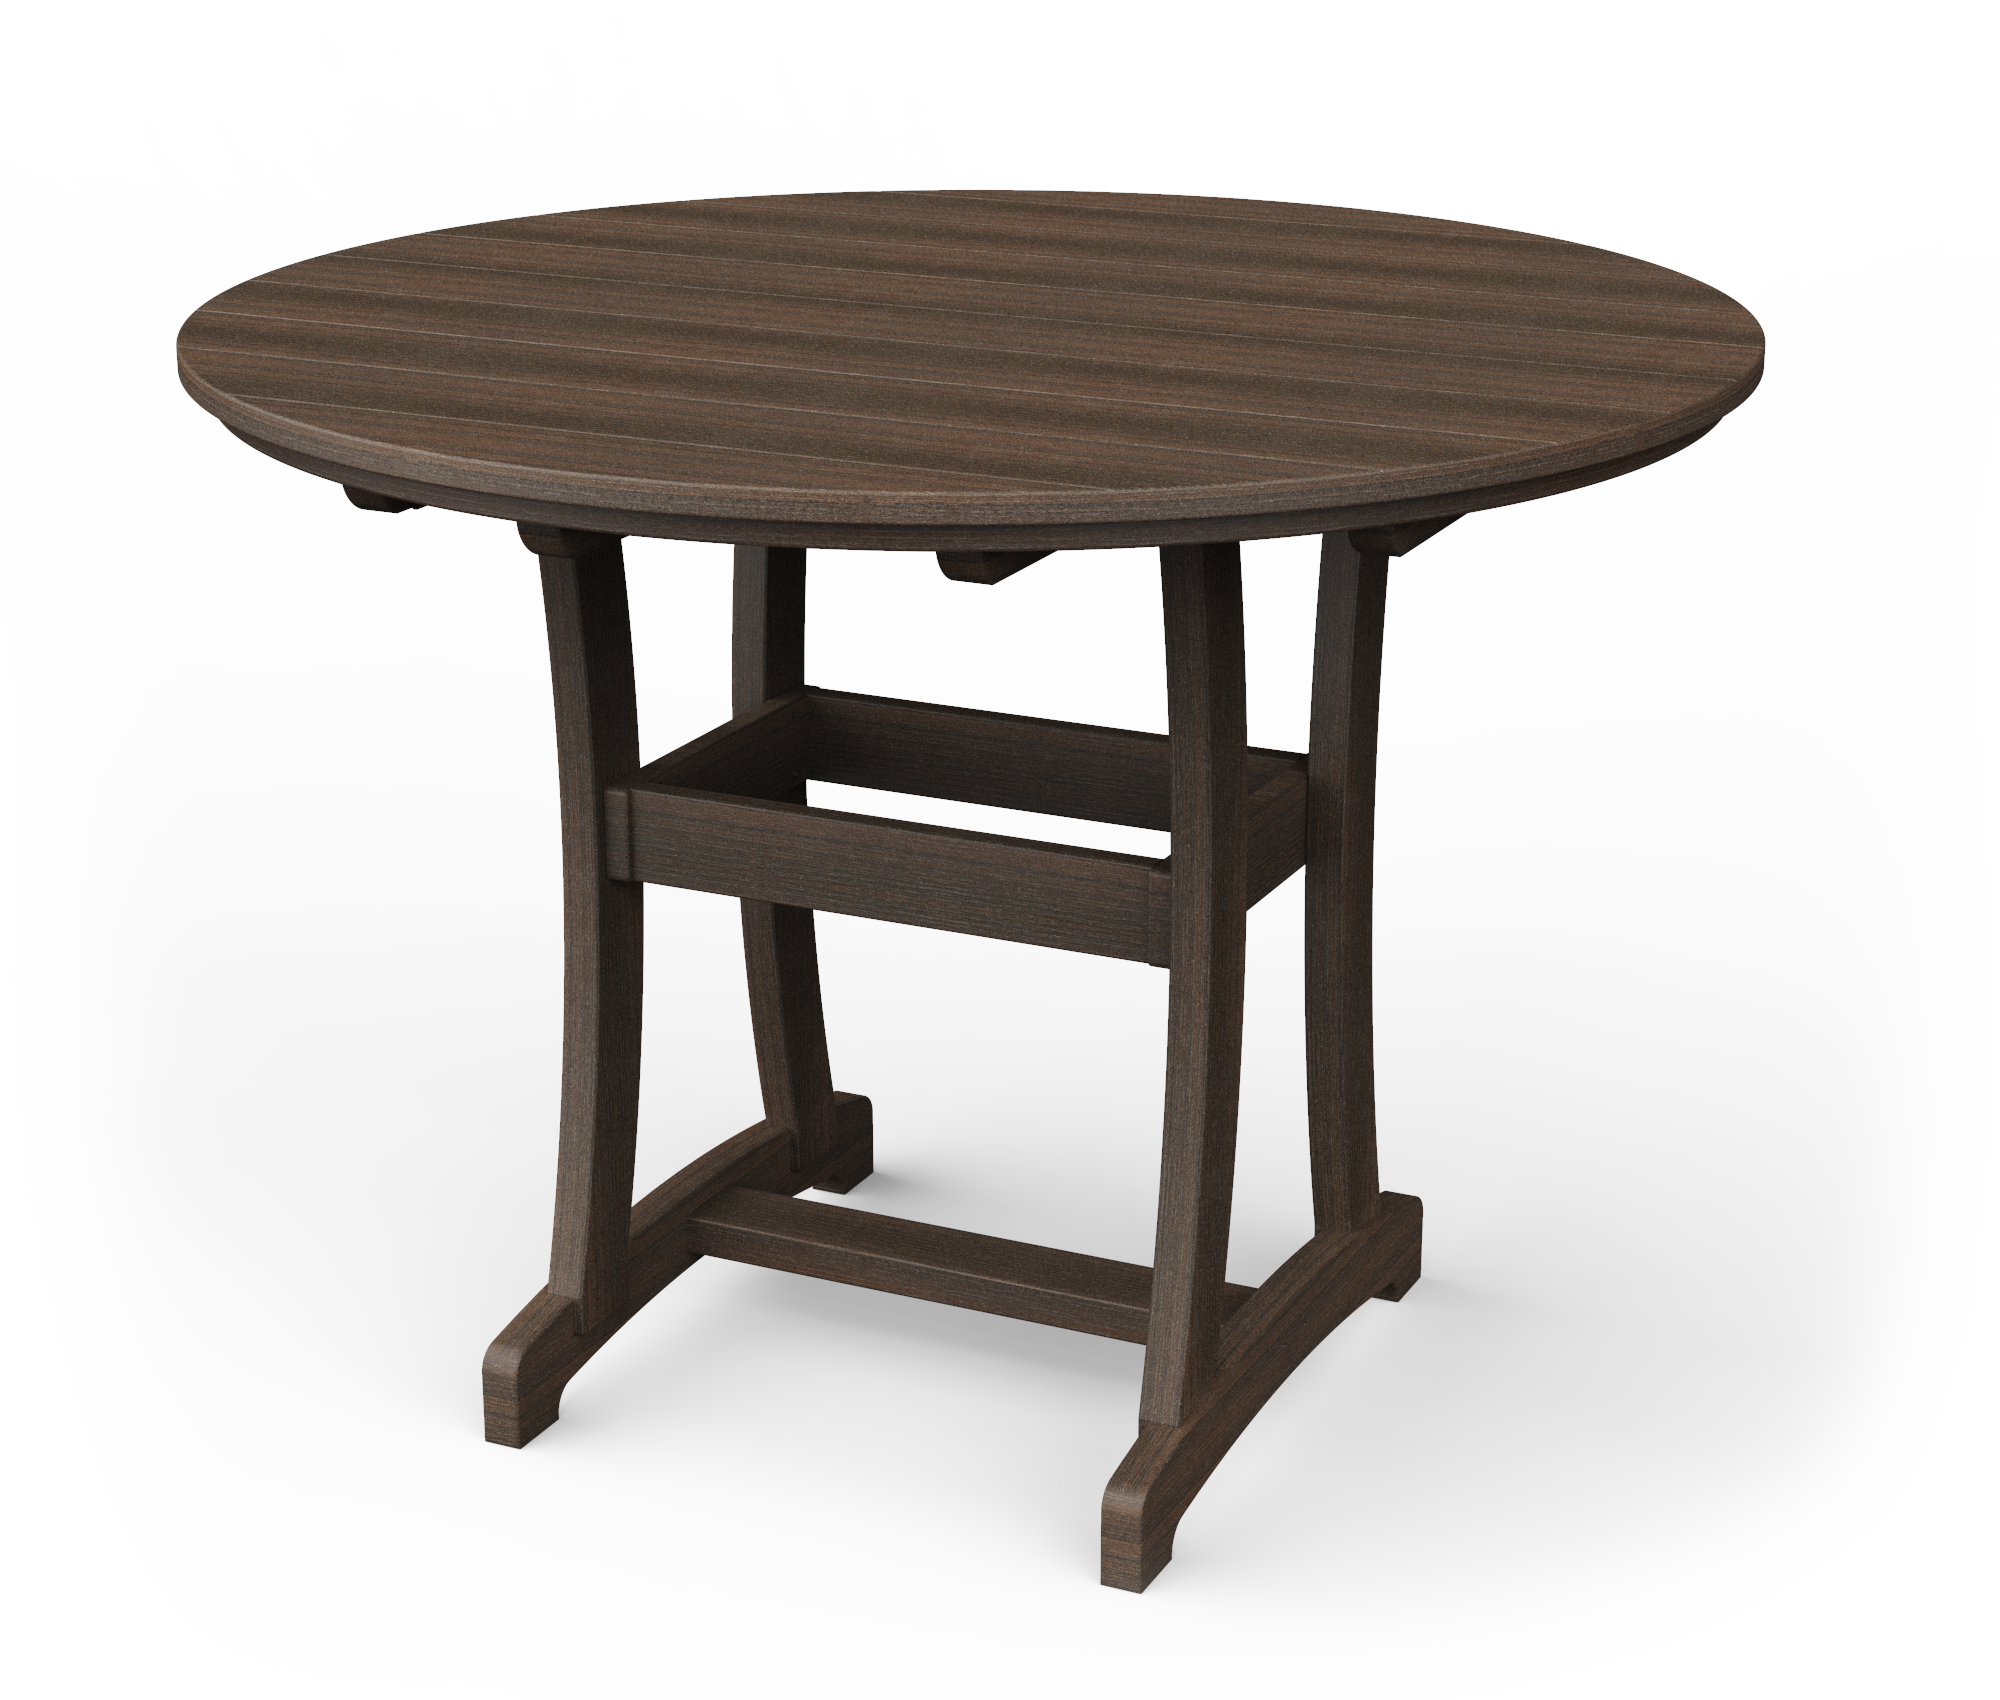 Poly round bar table.